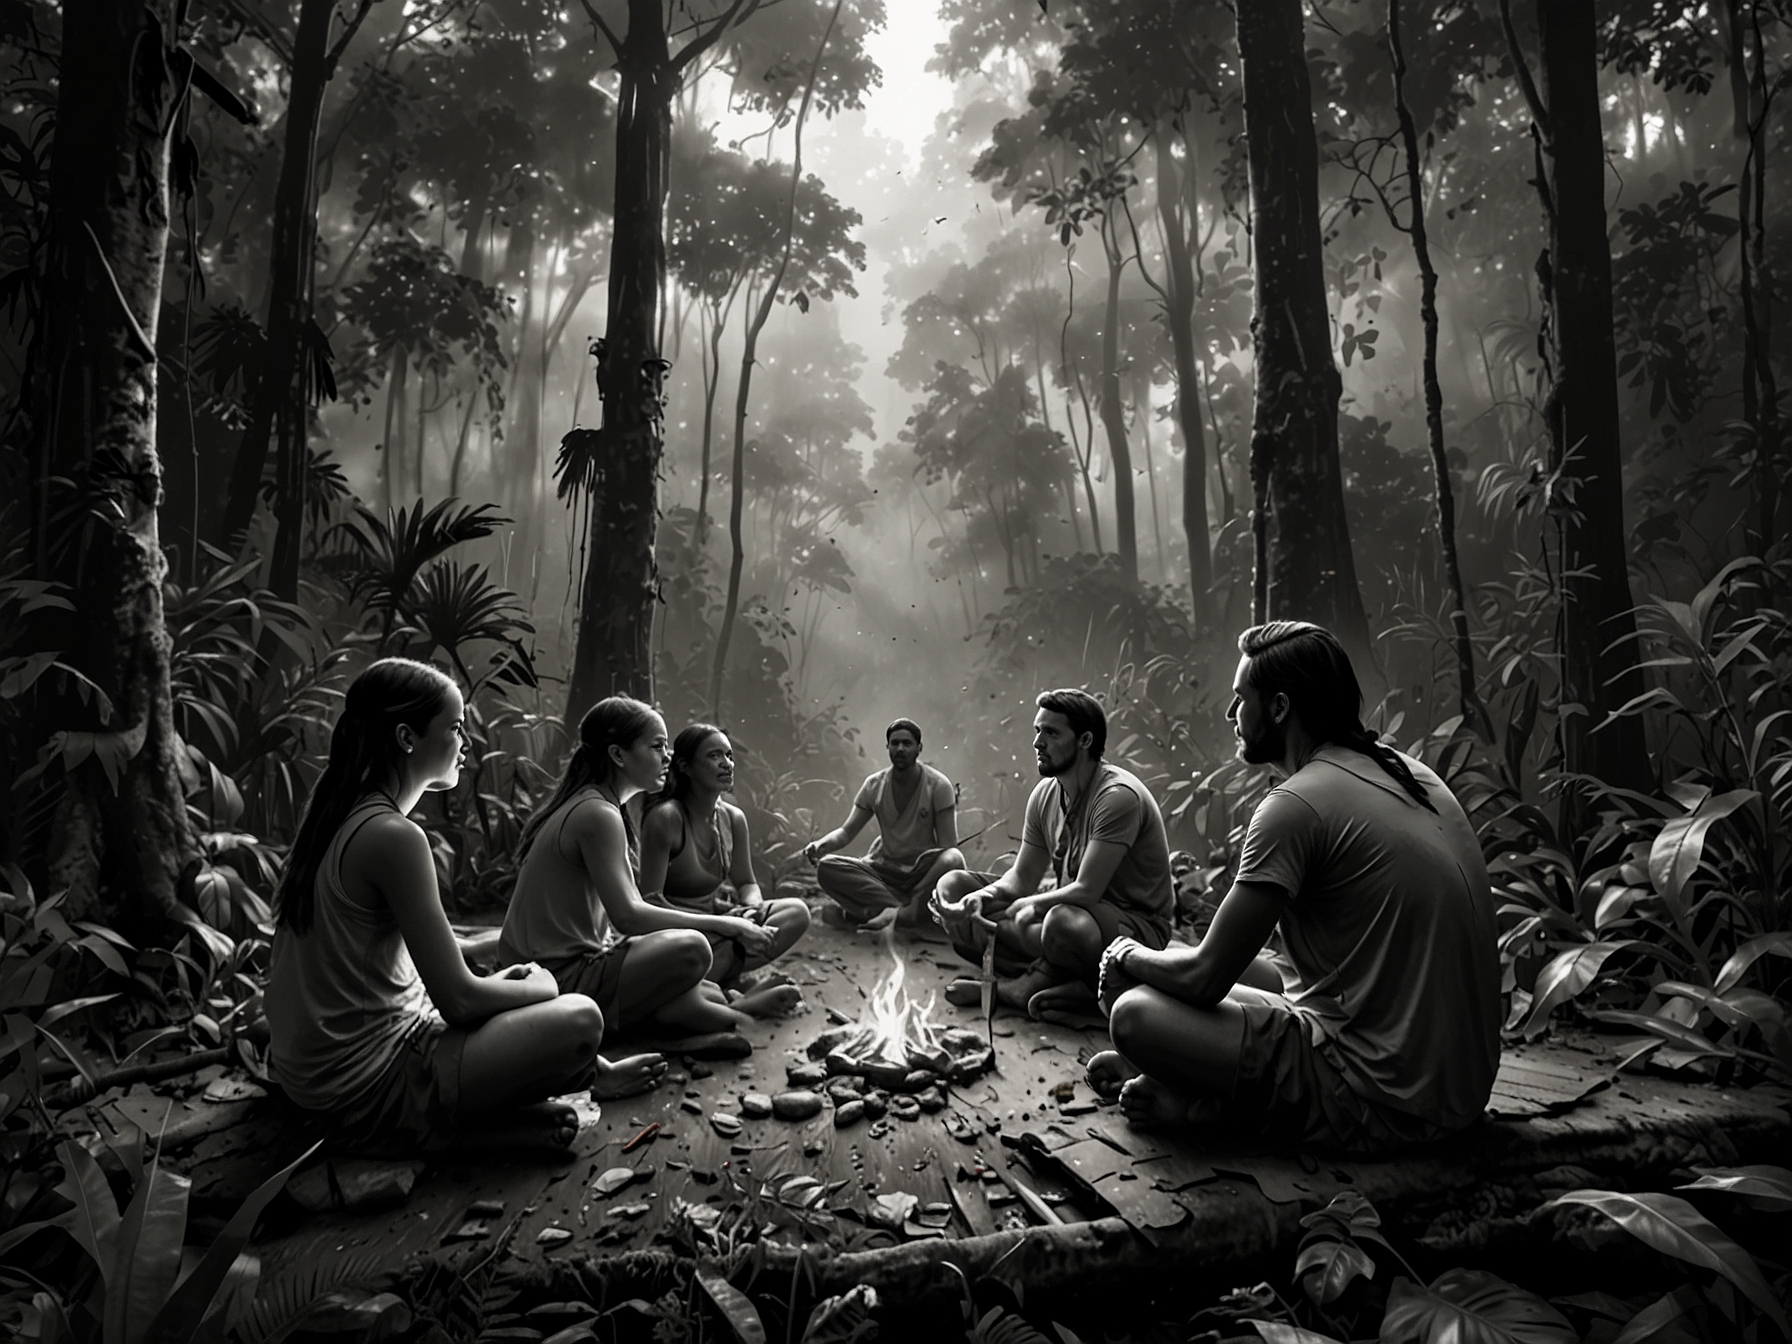 Travelers participate in a guided ayahuasca retreat in the Amazon rainforest, facilitated by skilled shamans, fostering profound personal insights and a deep sense of connection with nature.